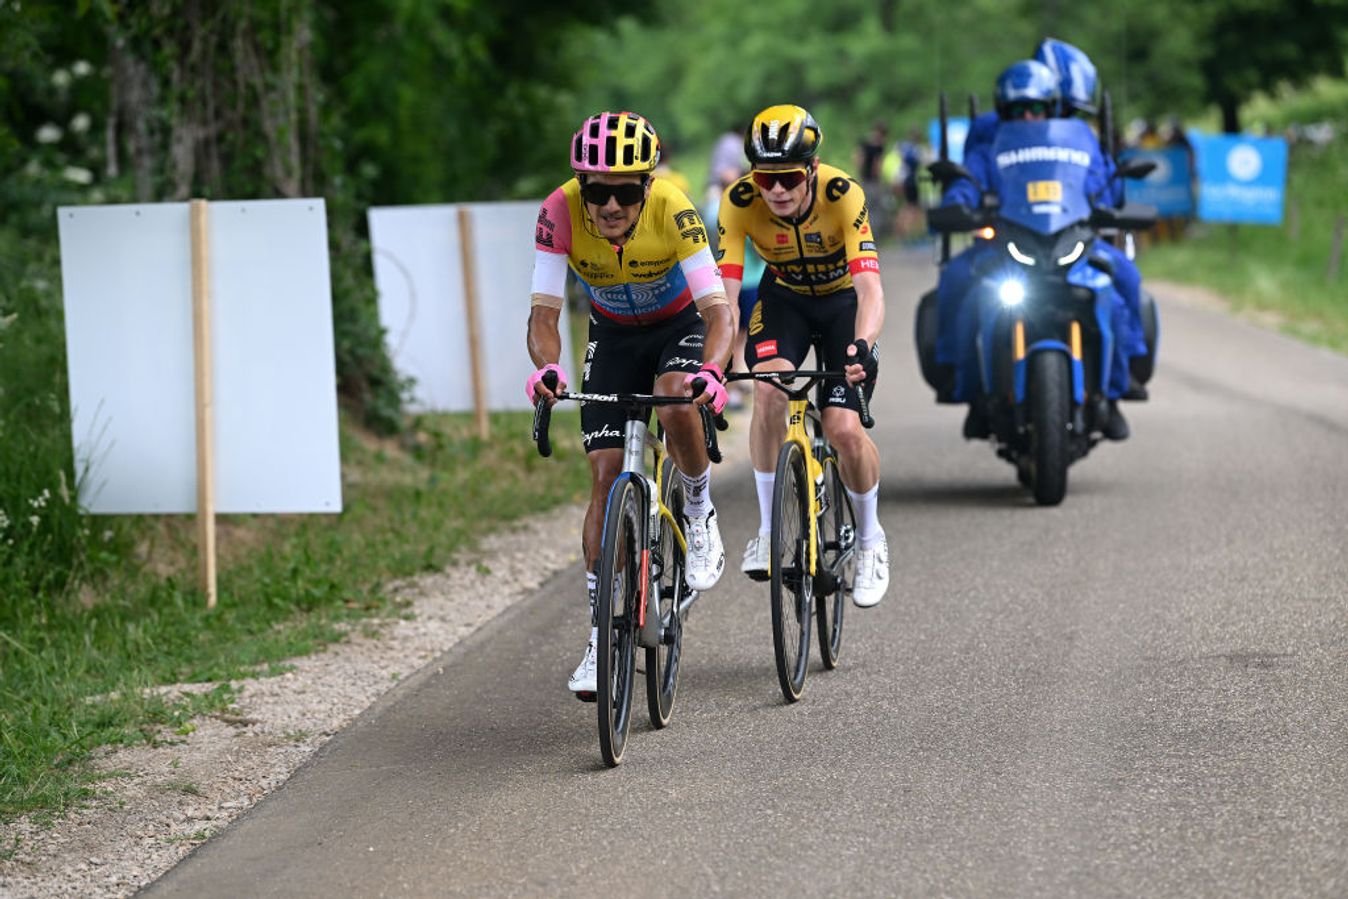 Richard Carapaz and Jonas Vingegaard on the attack at the 2023 Critérium du Dauphiné